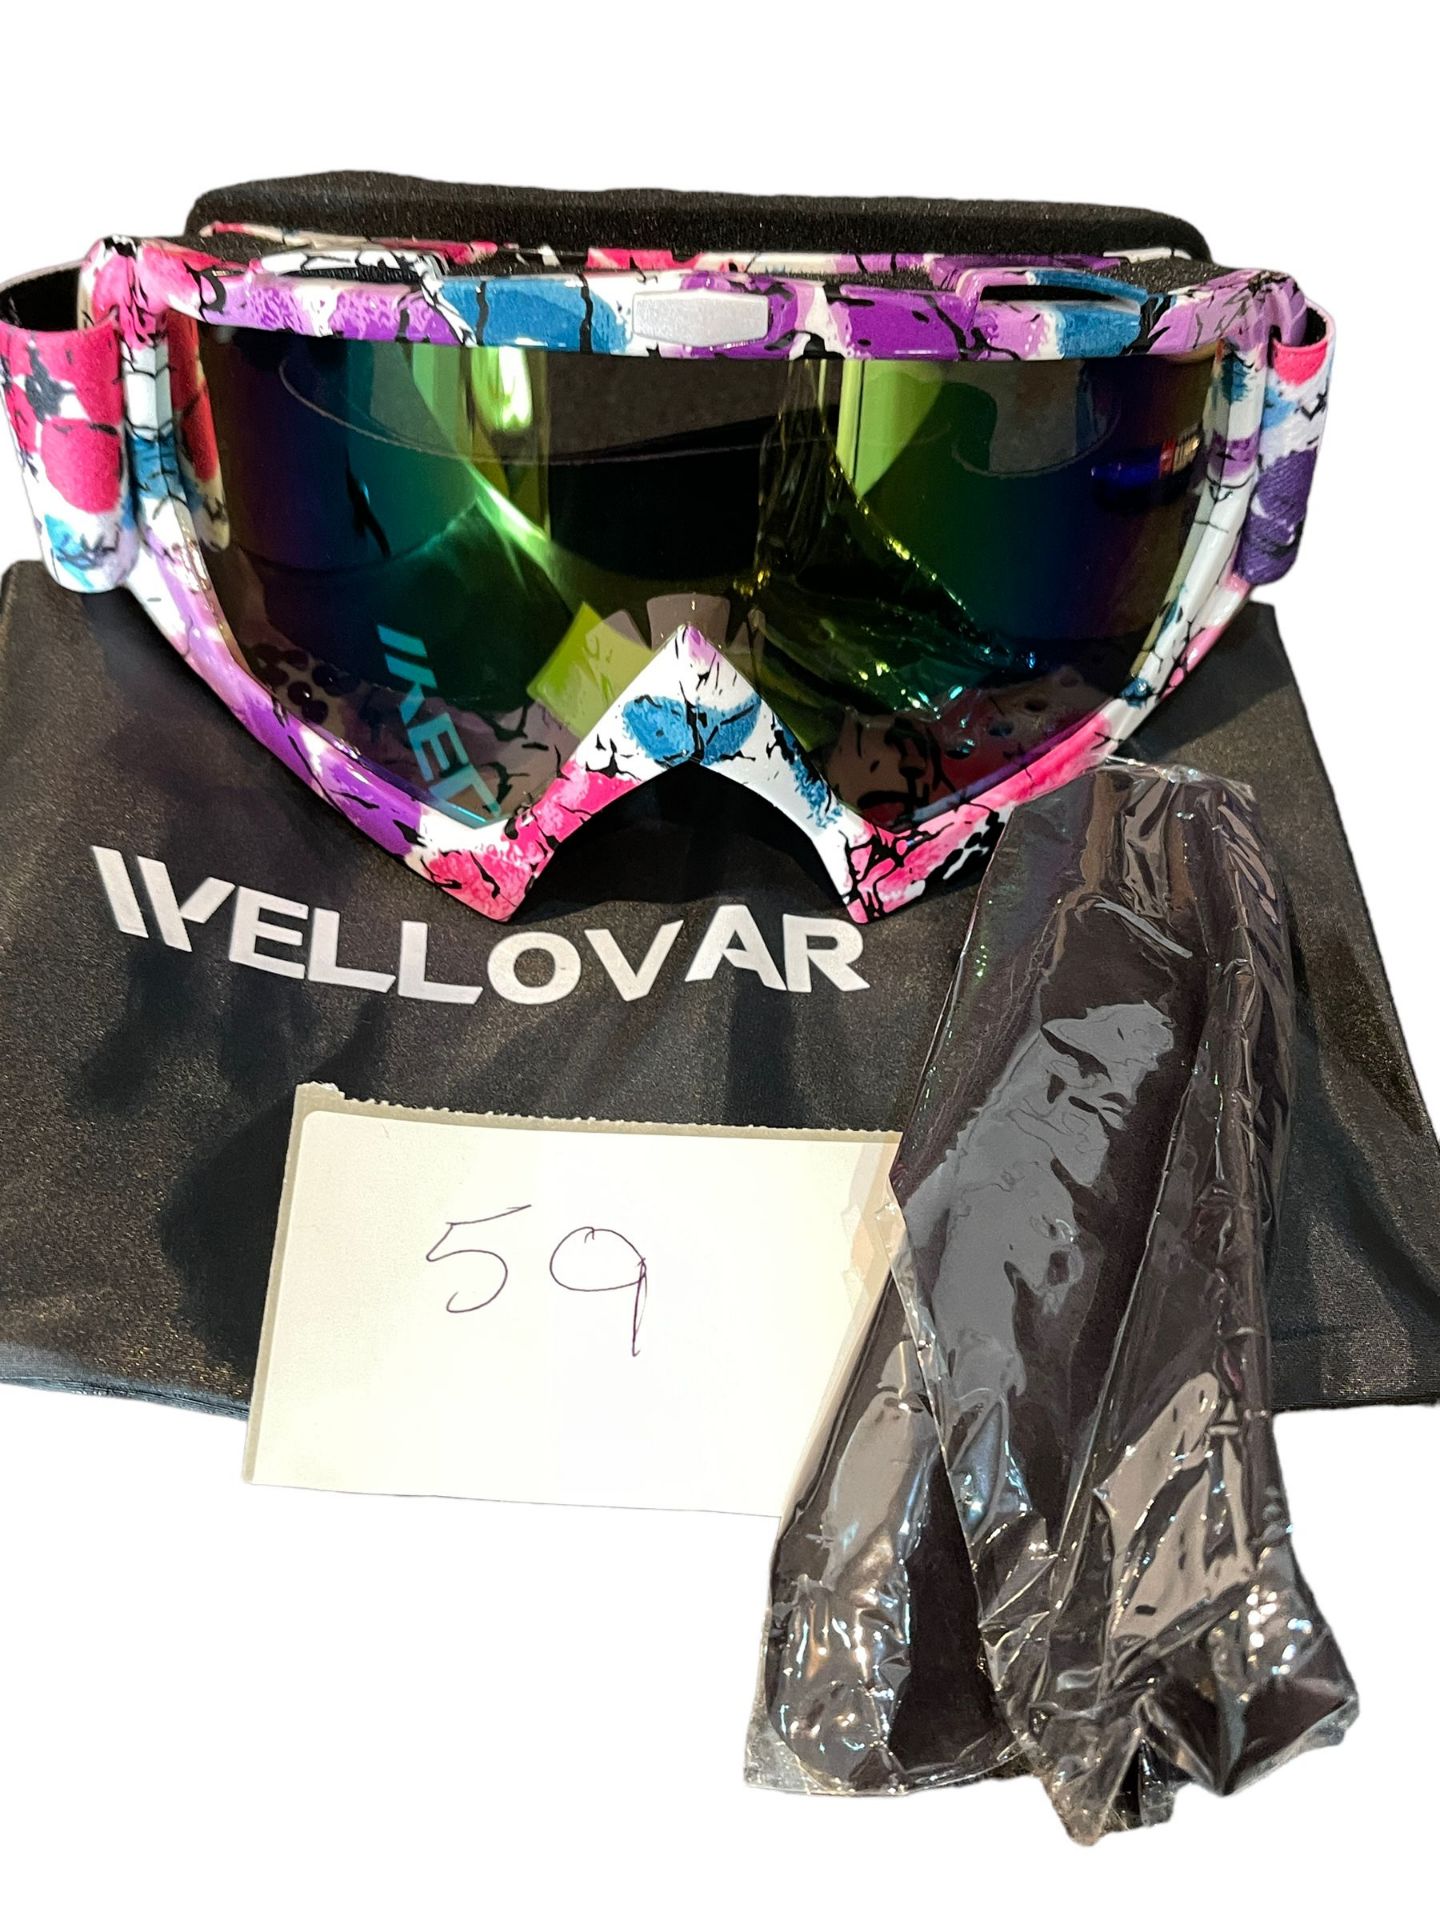 wellovar Snow goggles new - Image 2 of 3